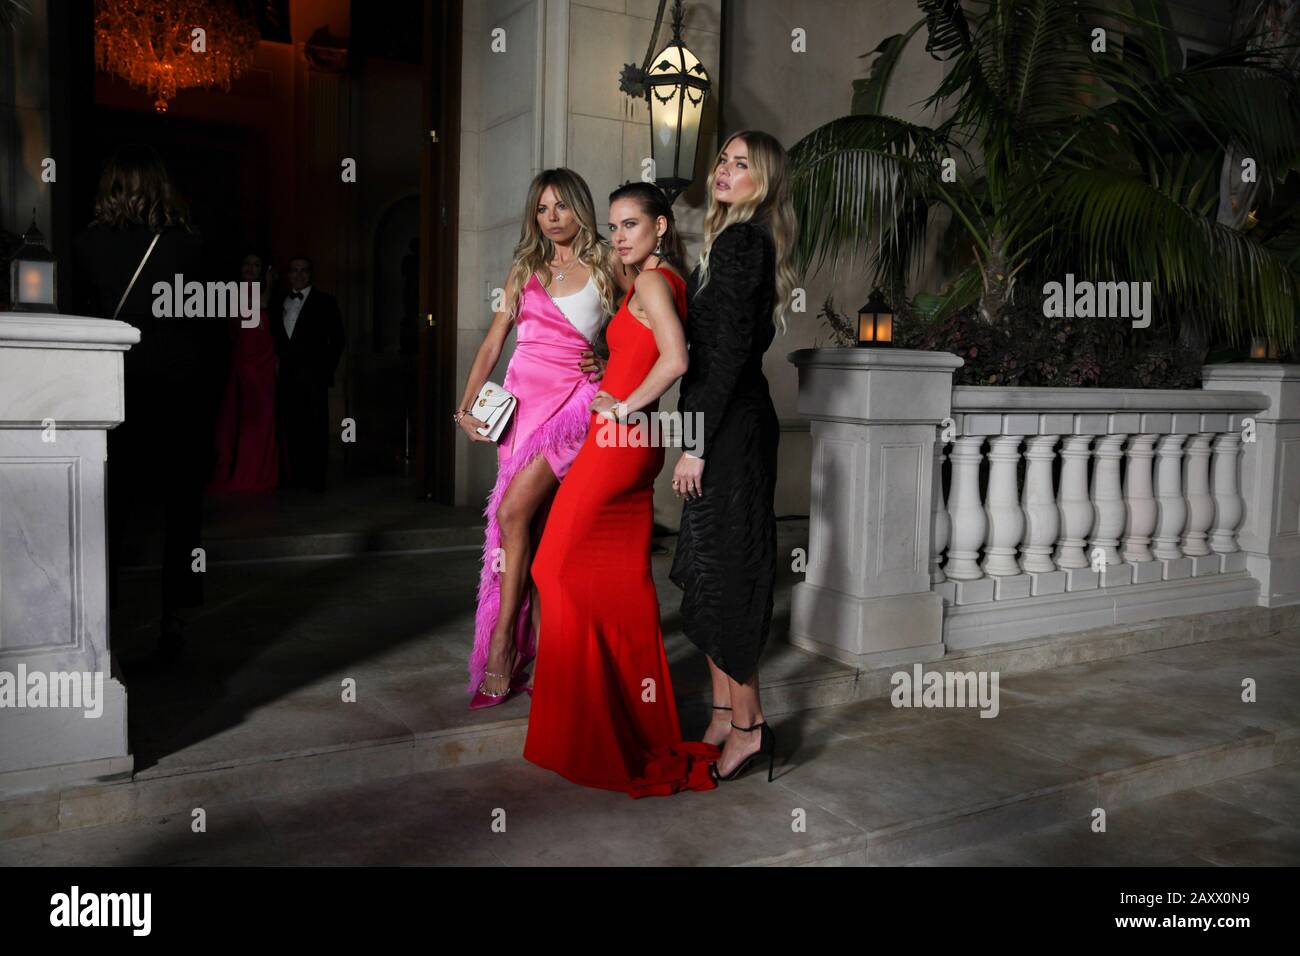 Models Lana Zakocela, Erica Pelosini and Tori Praver attend Hollywood for the Global Ocean Gala at Beverly Hills on February 6, 2020 in Los Angeles, California. Stock Photo